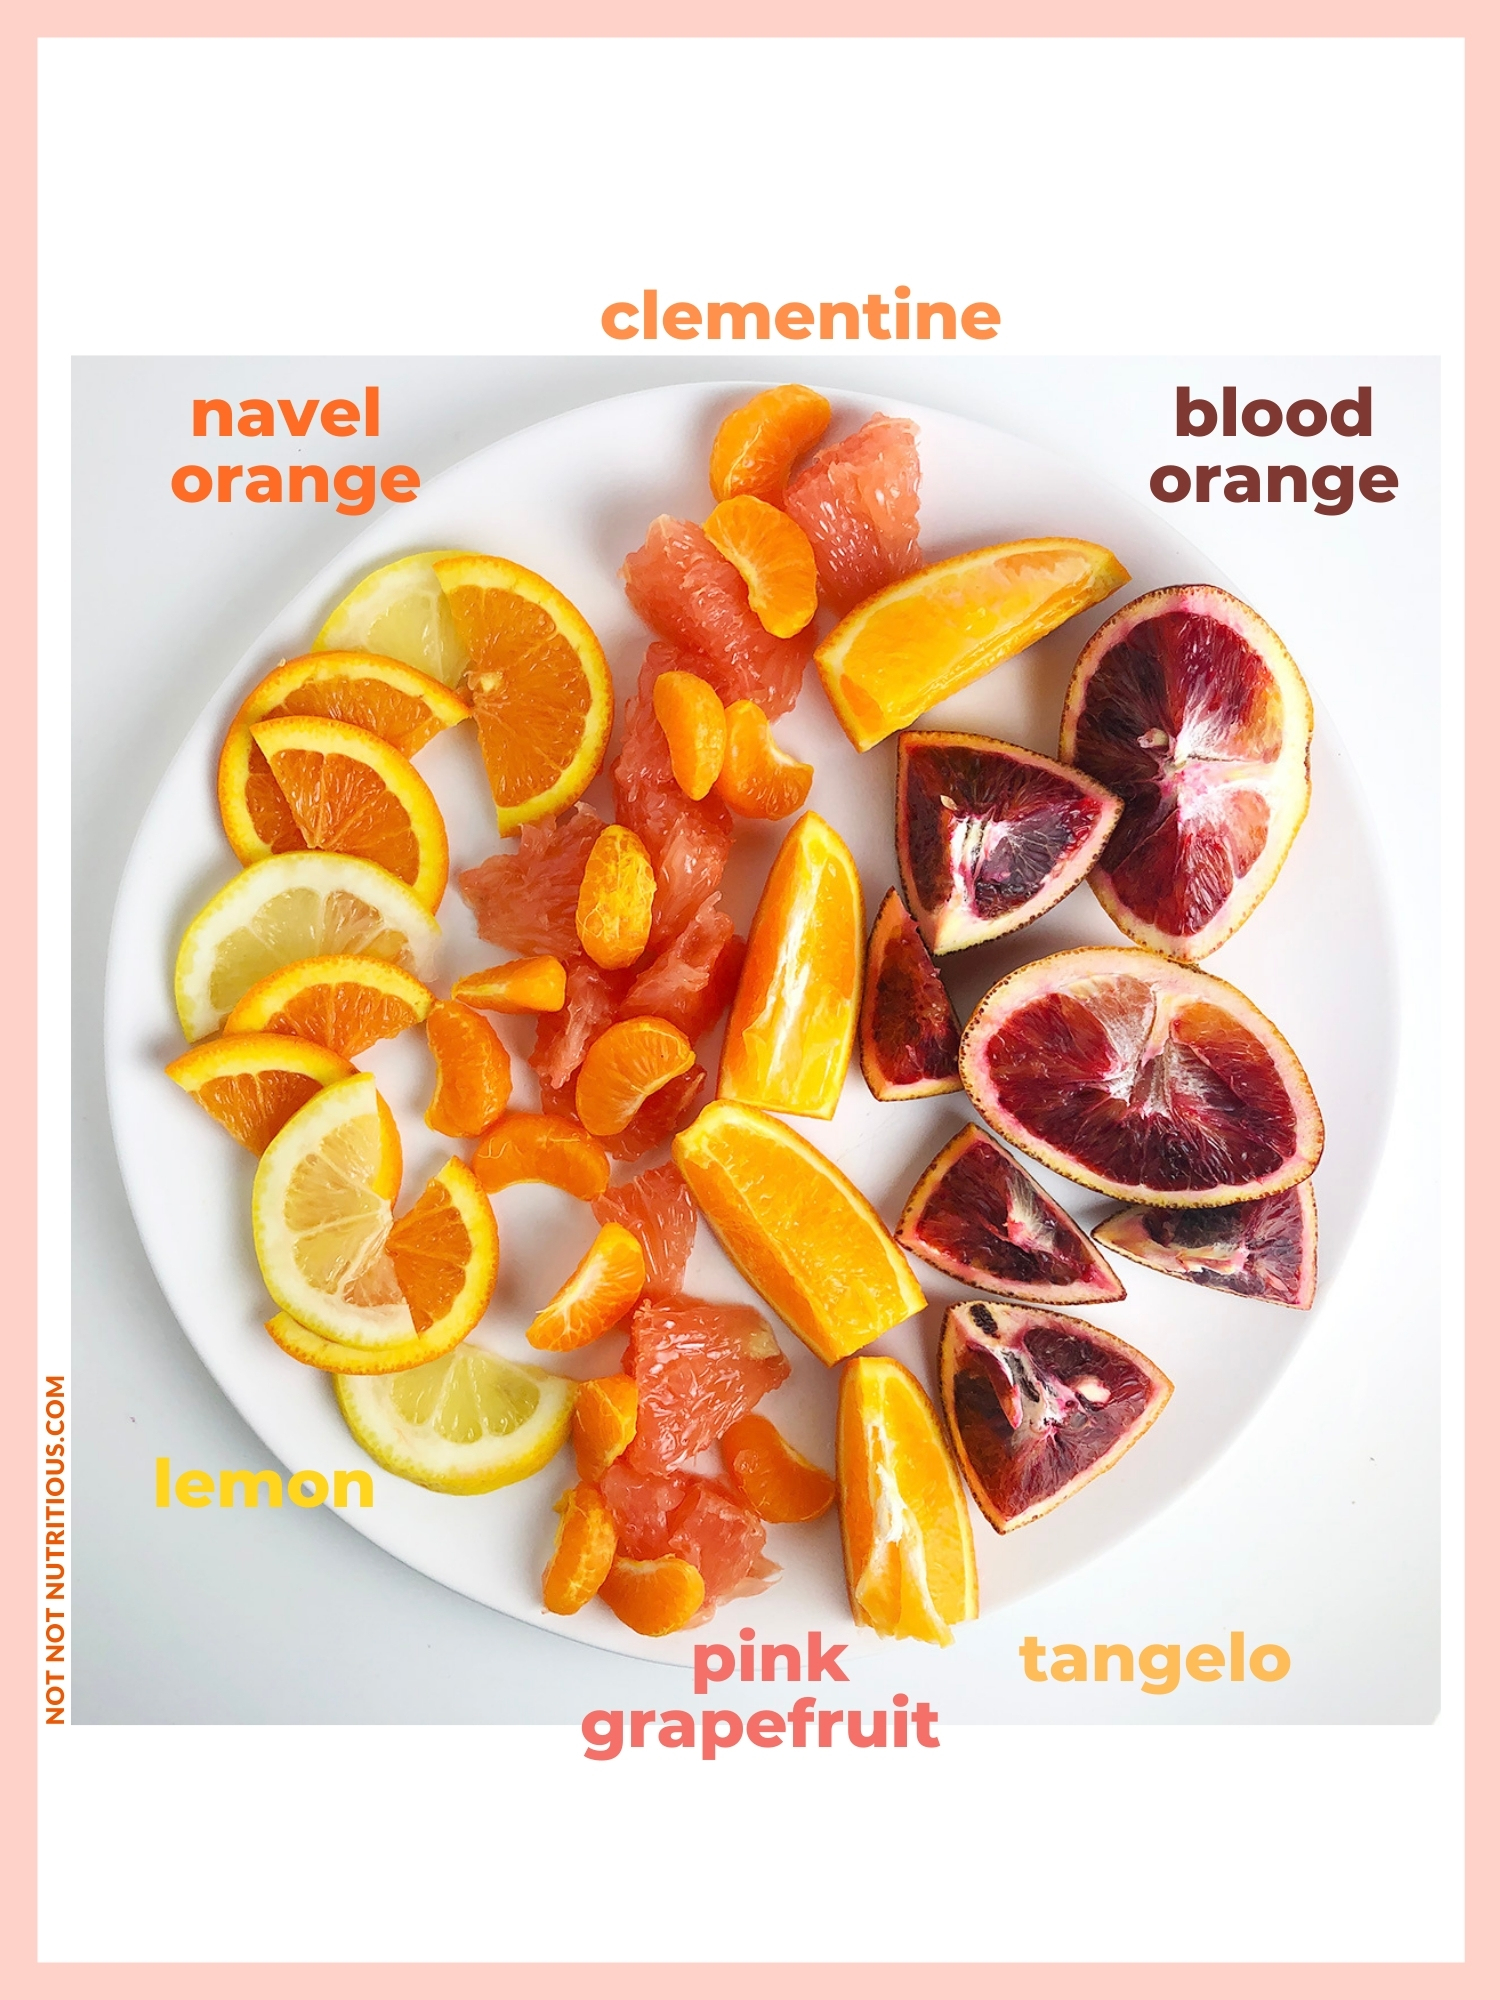 Infographic showing photo of different types of citrus on a white plate; clementine, blood orange, tangelo, pink grapefruit, lemon and navel orange